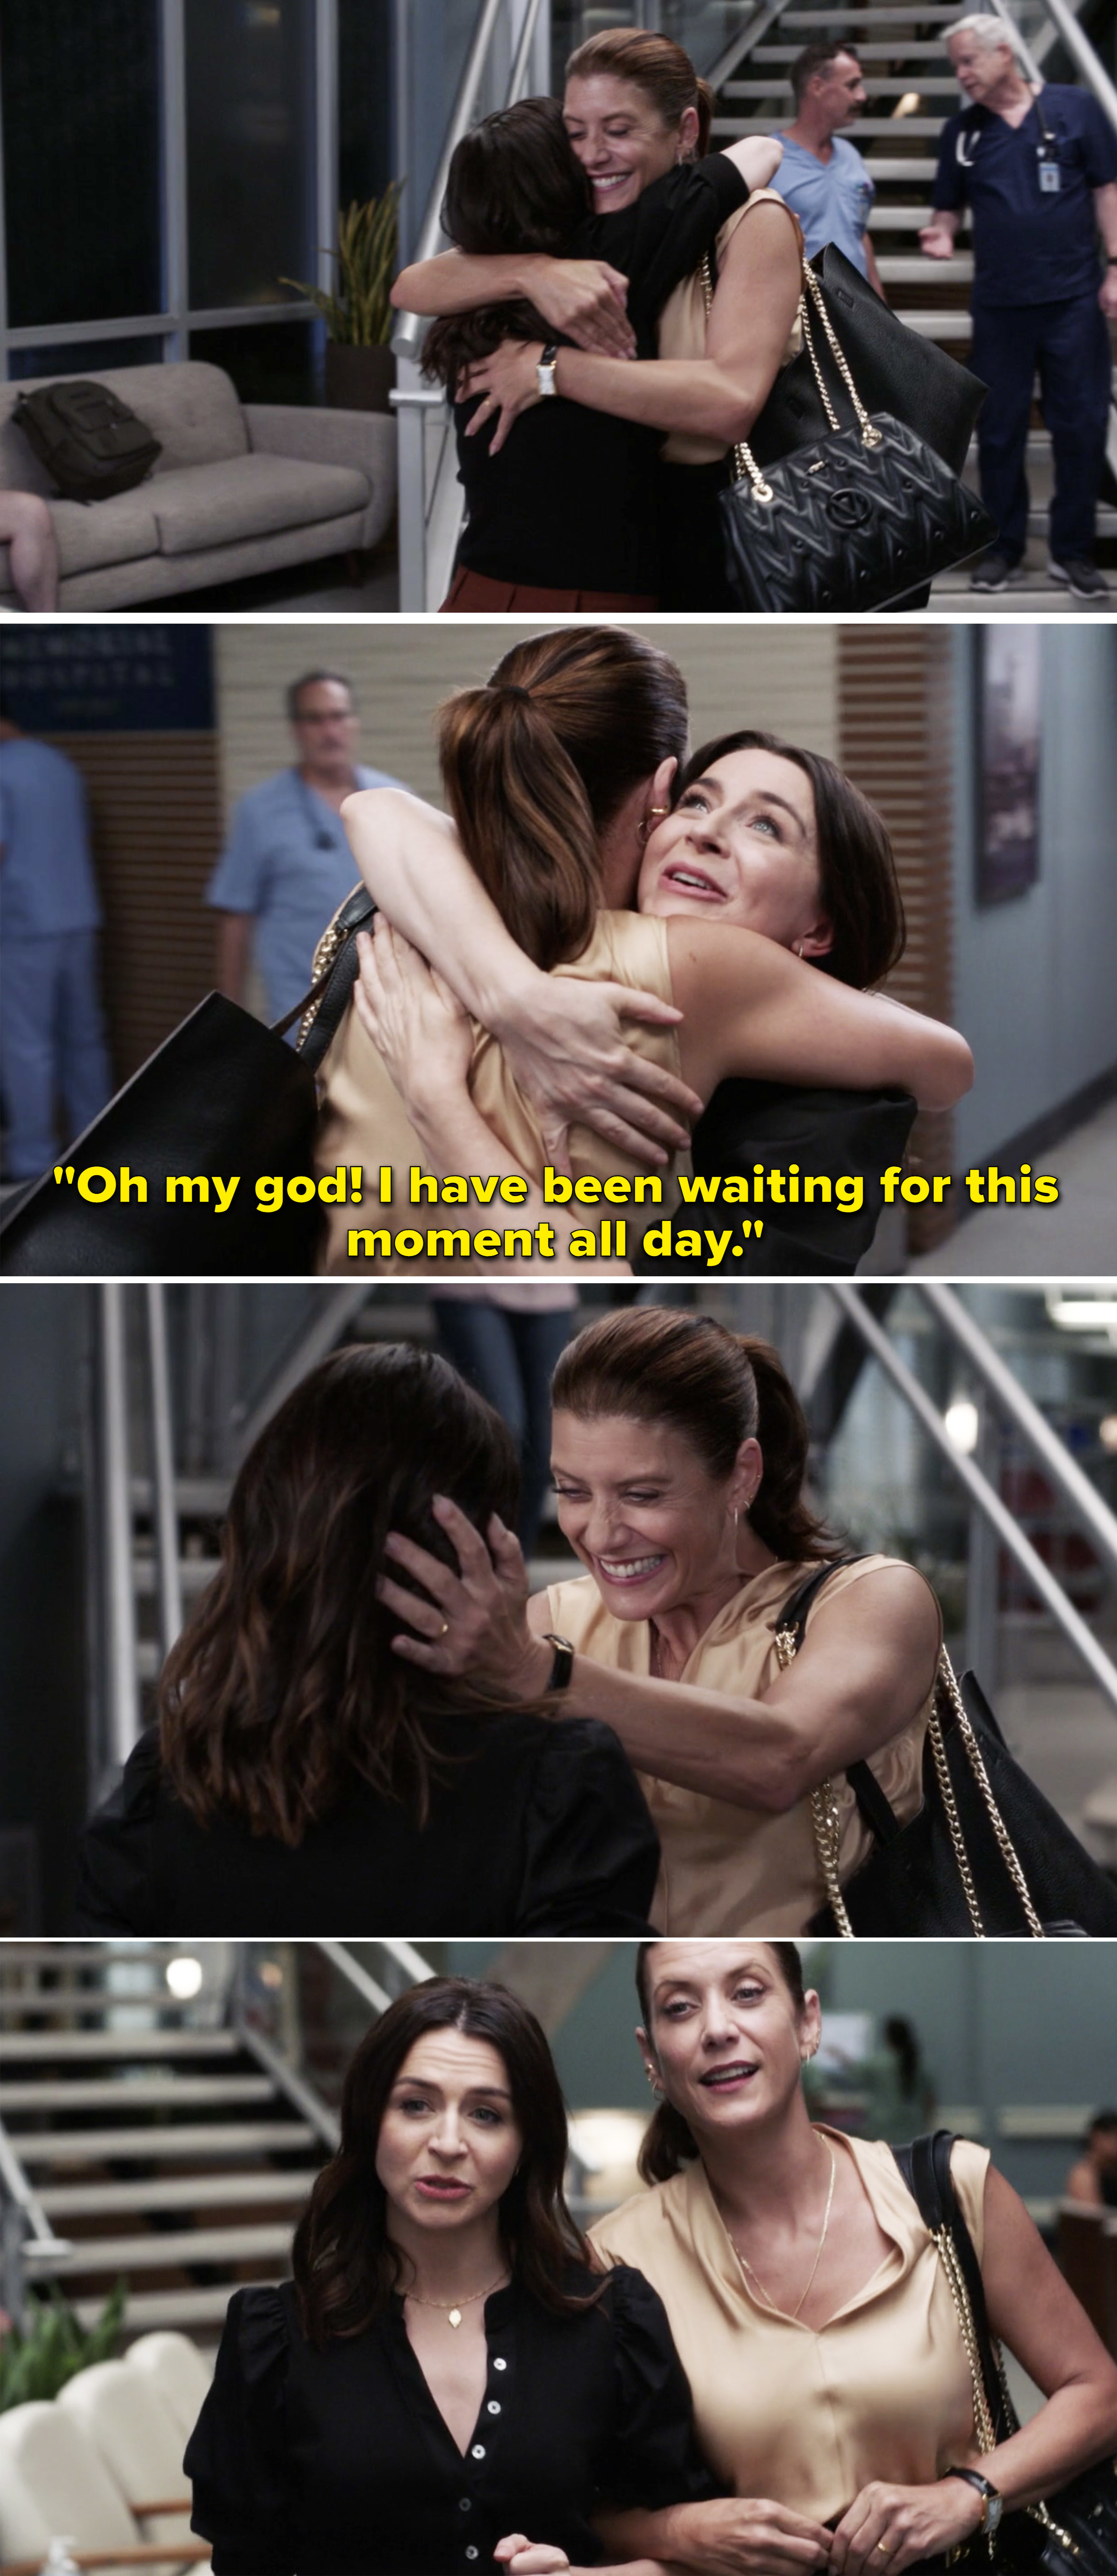 Amelia saying, &quot;Oh my god! I have been waiting for this moment all day&quot; and she and Addison hug